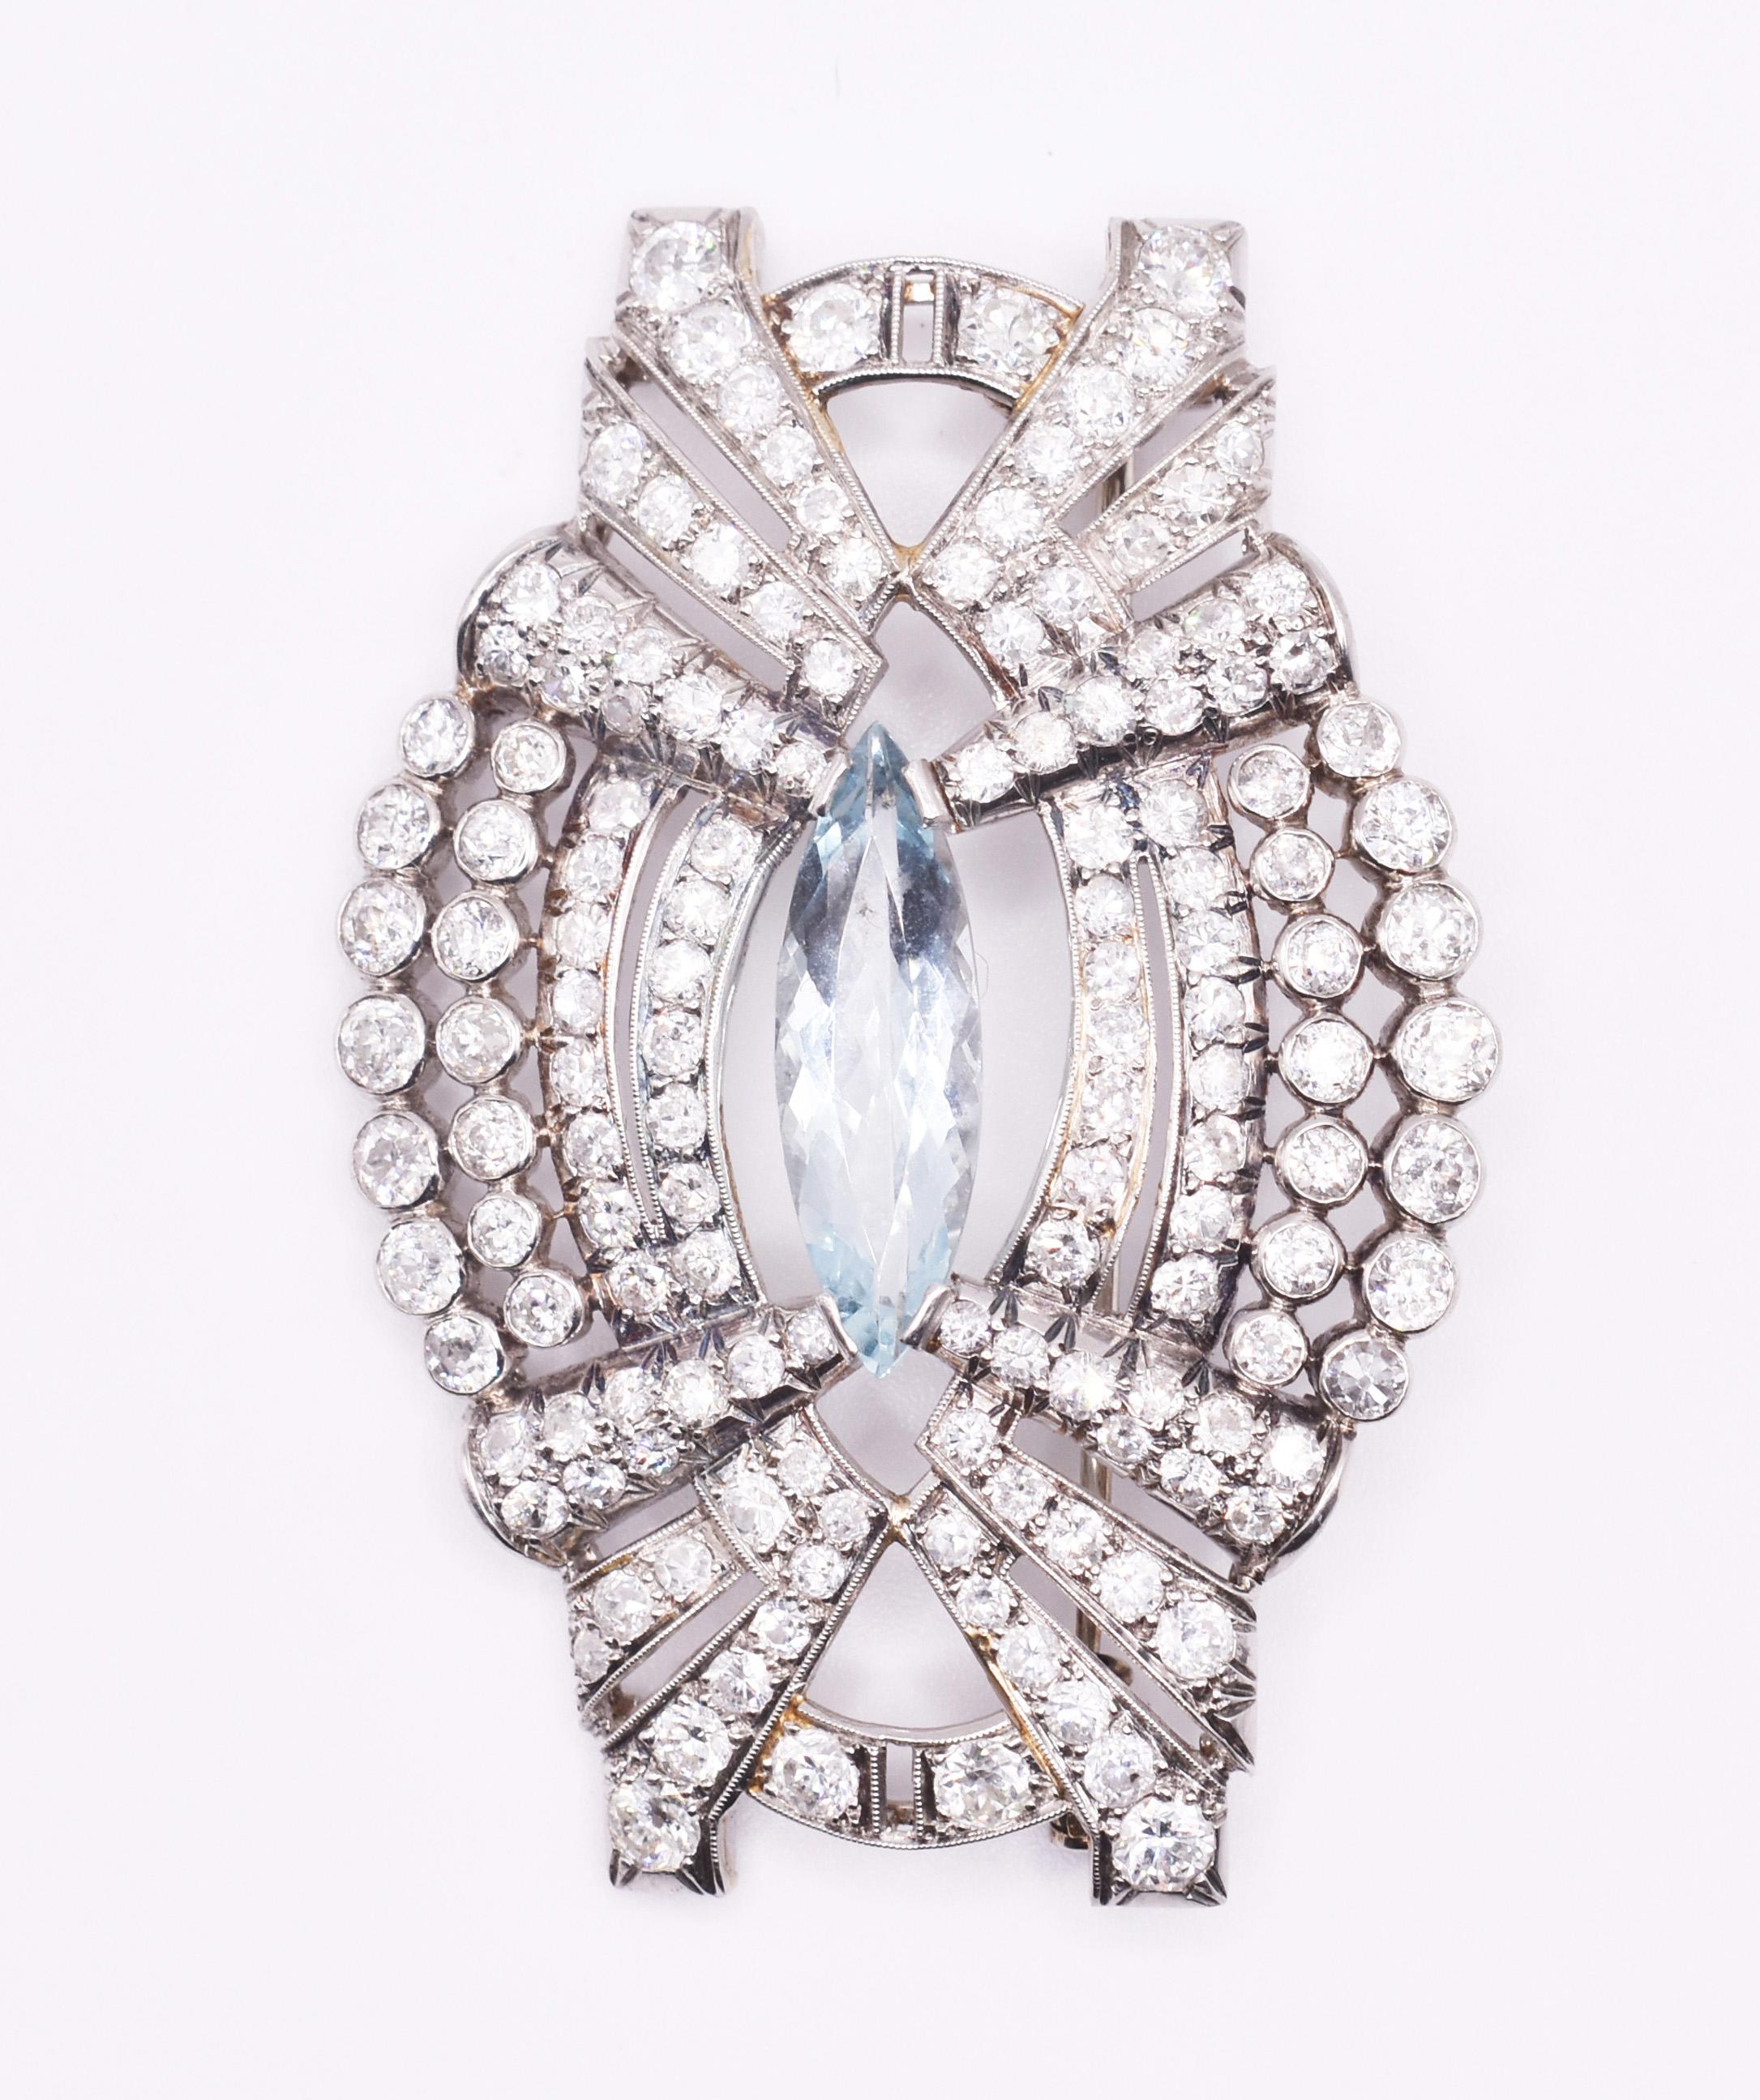 A stunning antique platinum, aquamarine and diamond brooch featuring 140 stunning old cut diamonds totalling an approximate 7cts, with a fantastic aquamarine centre, approximately 3.50ct. The brooch remains in excellent condition for its